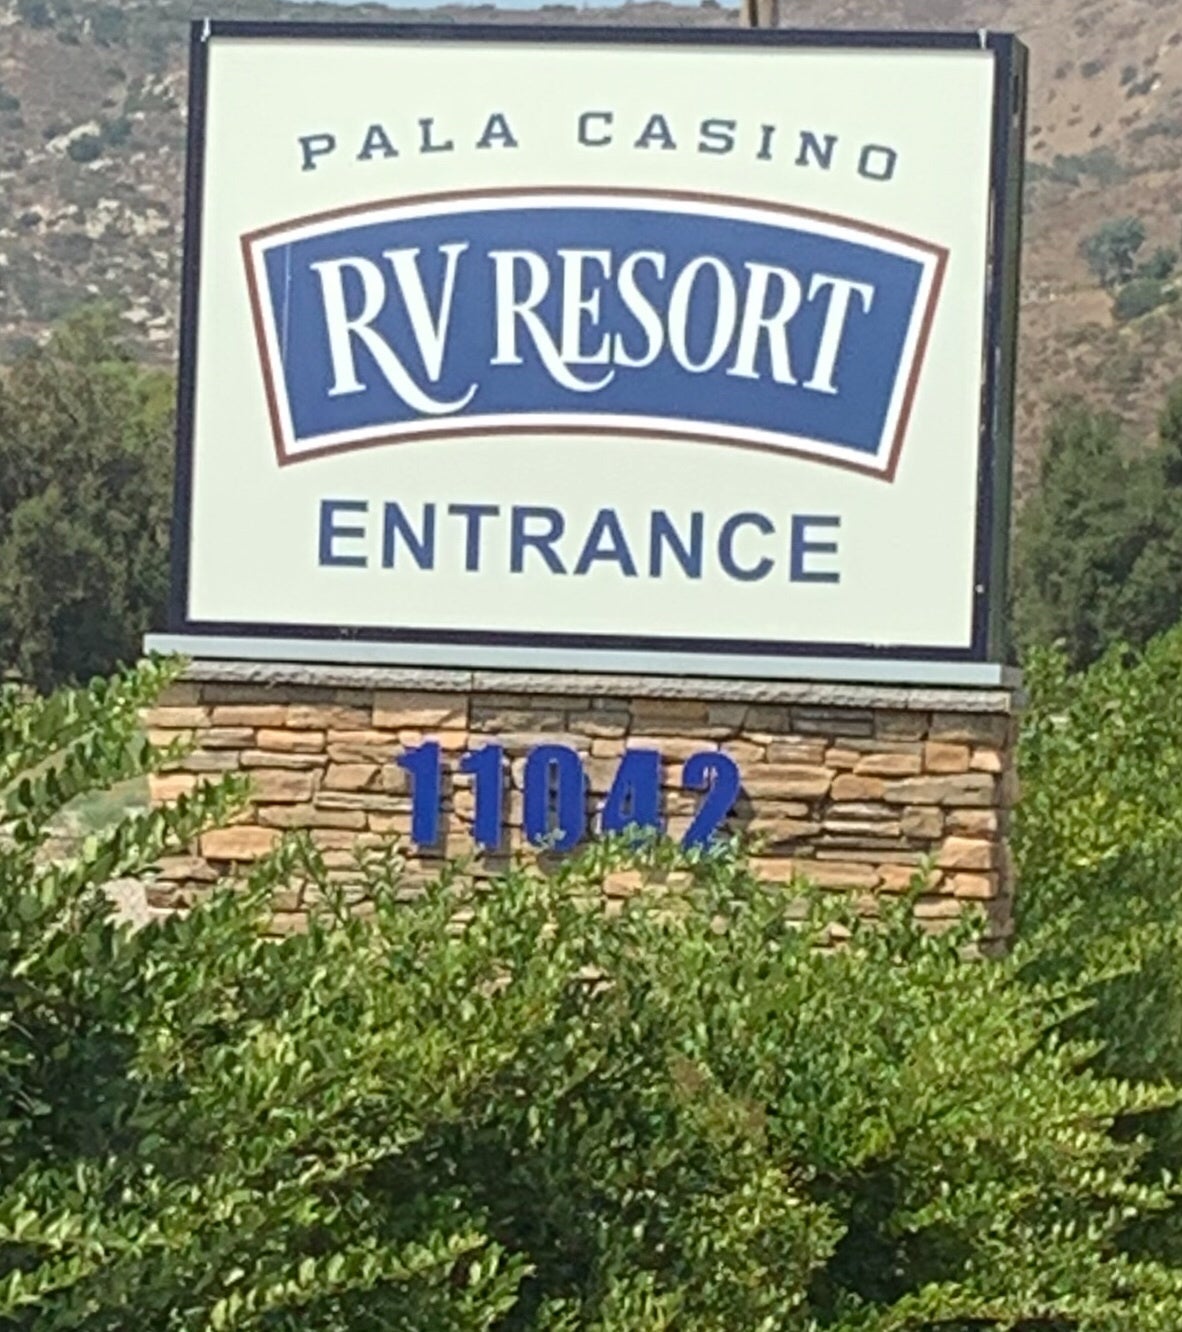 Camper submitted image from Pala Casino Spa Resort - 3